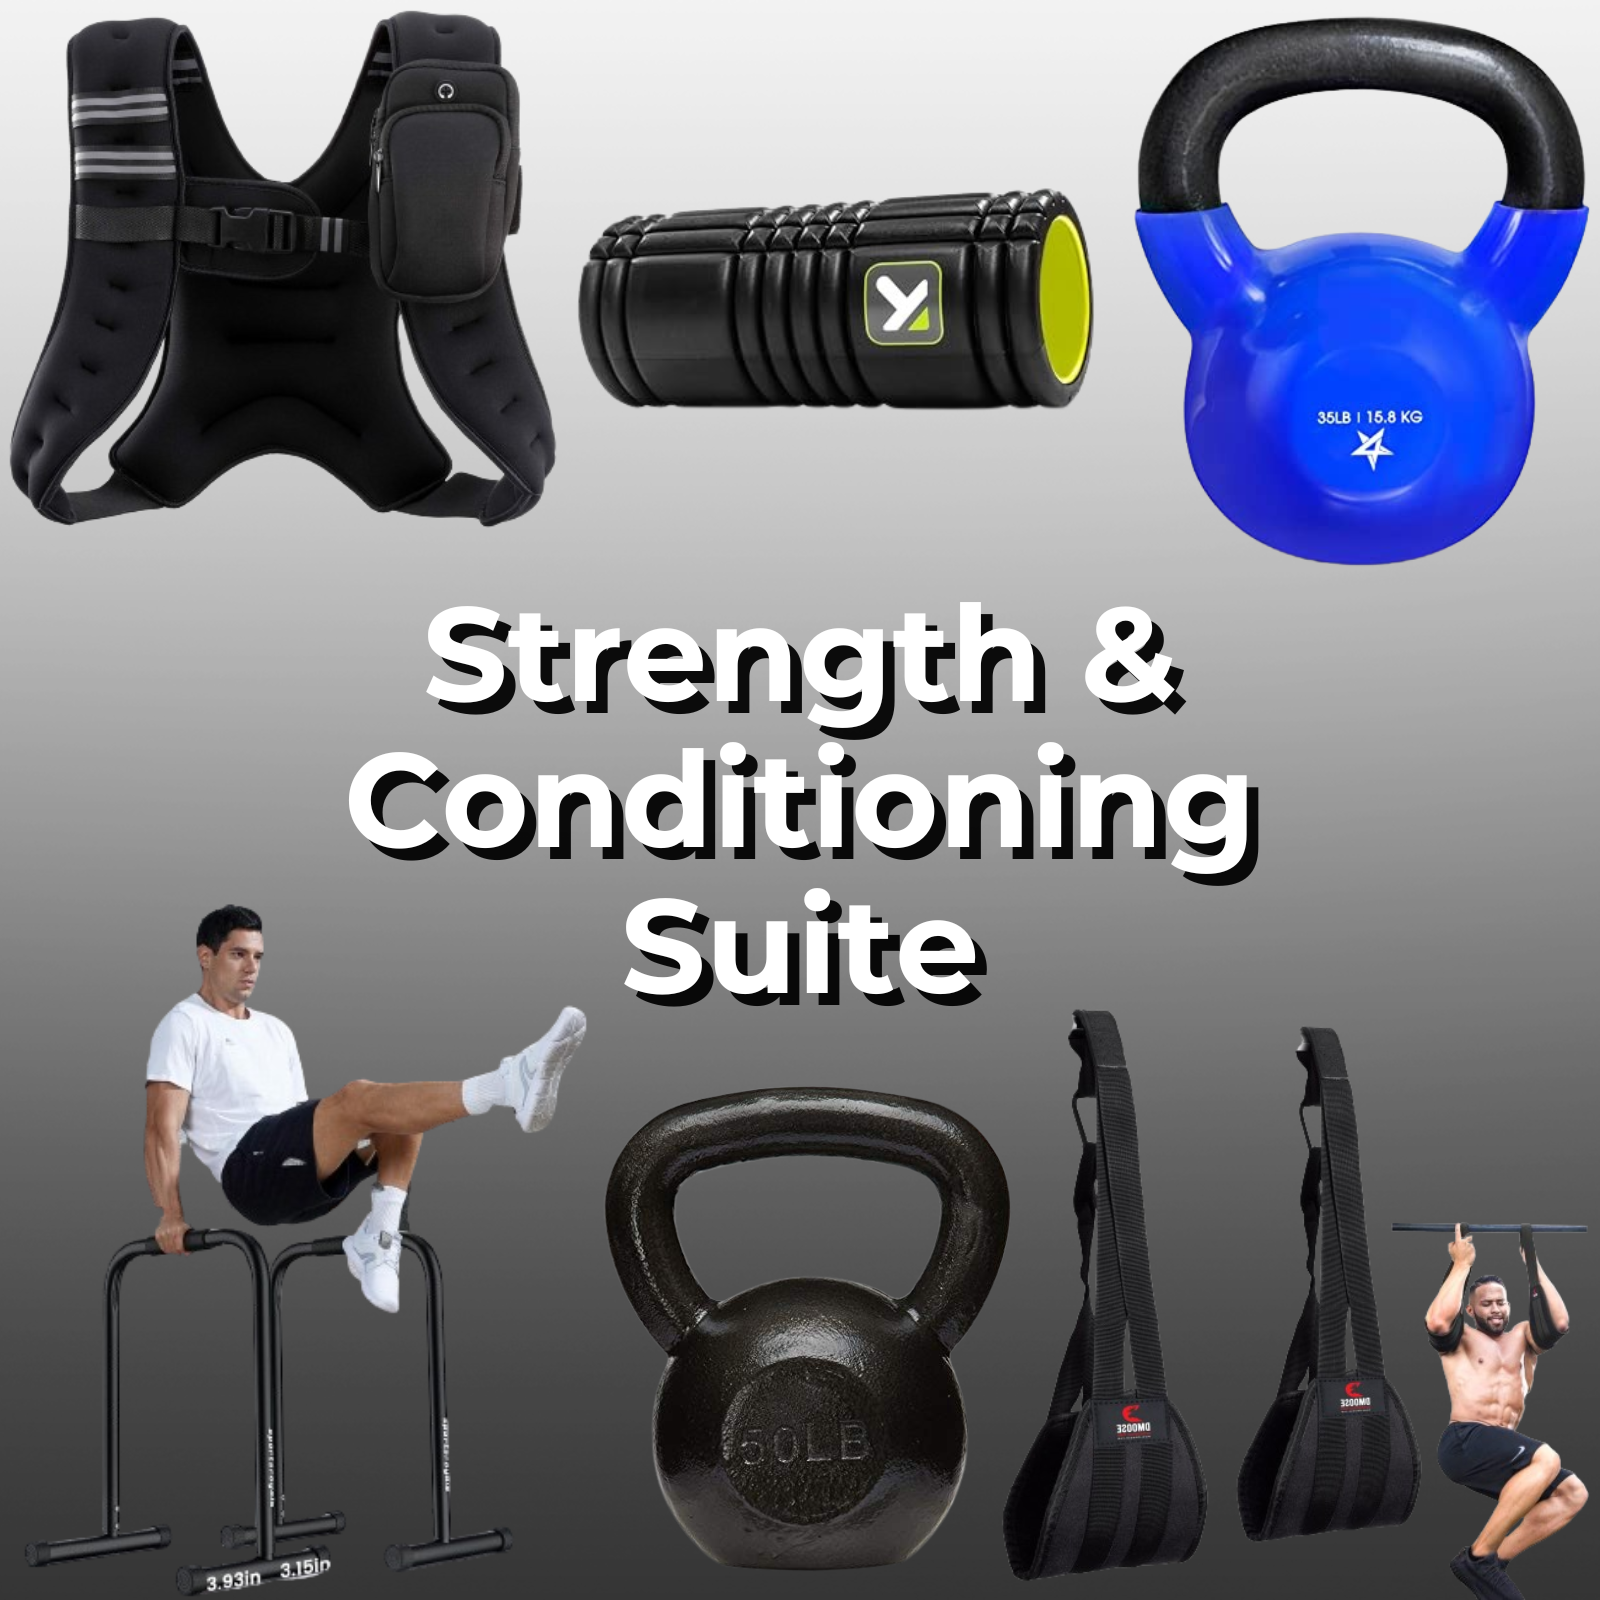 Assorted strength and conditioning products including kettlebells, weighted vests, and arm supports.